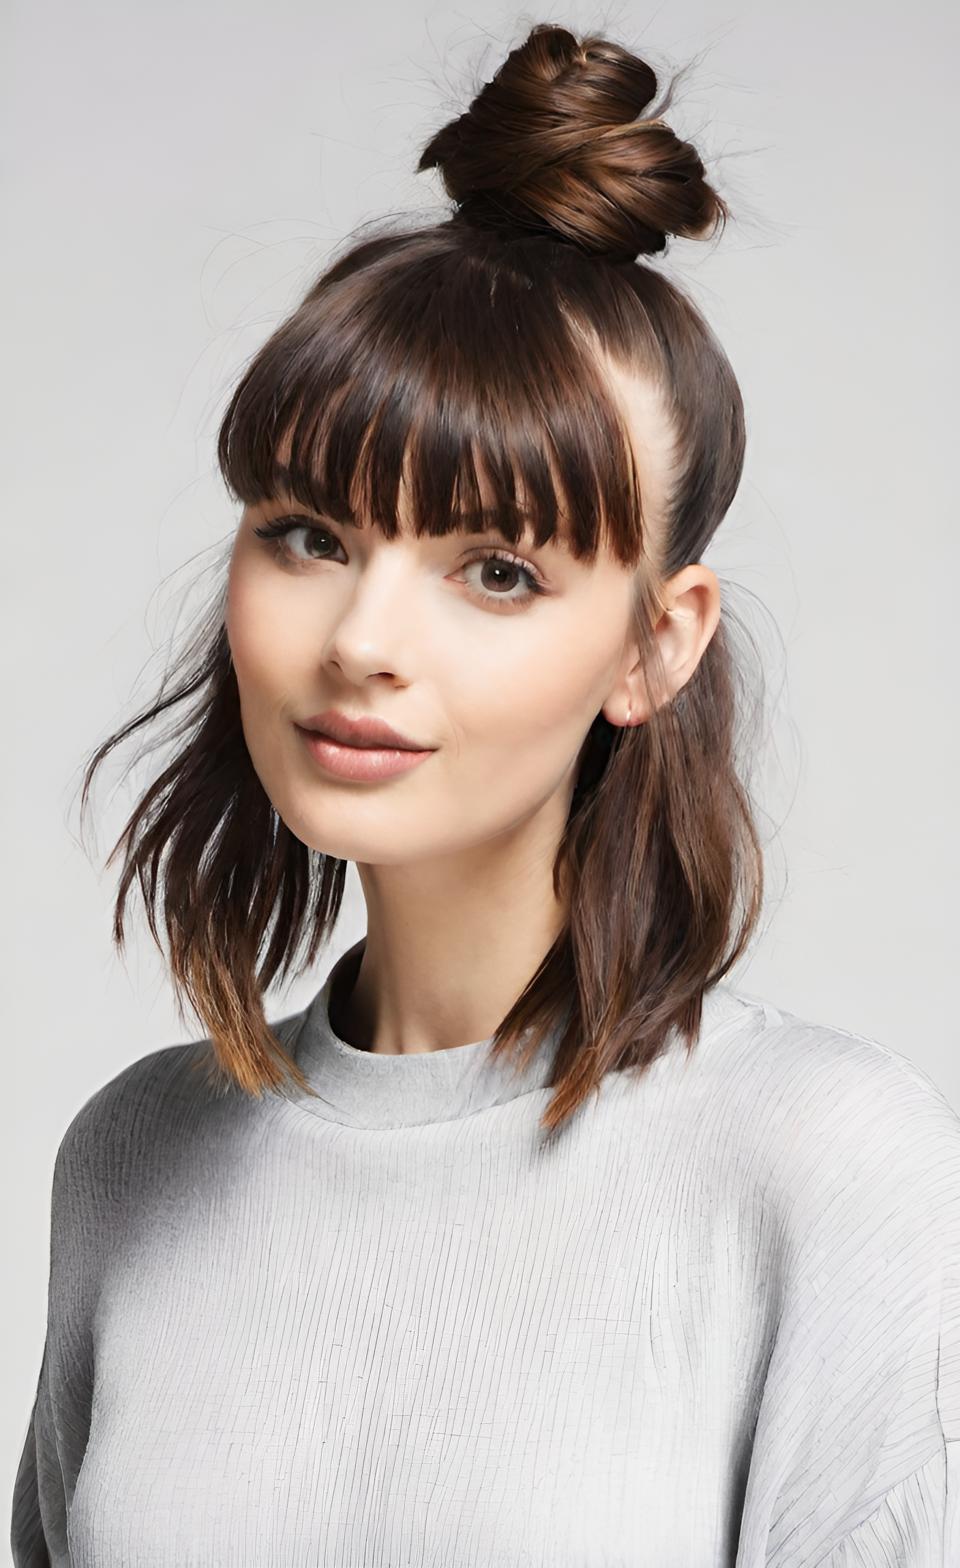 34 haircuts and hairstyles with bangs that are trendy right now